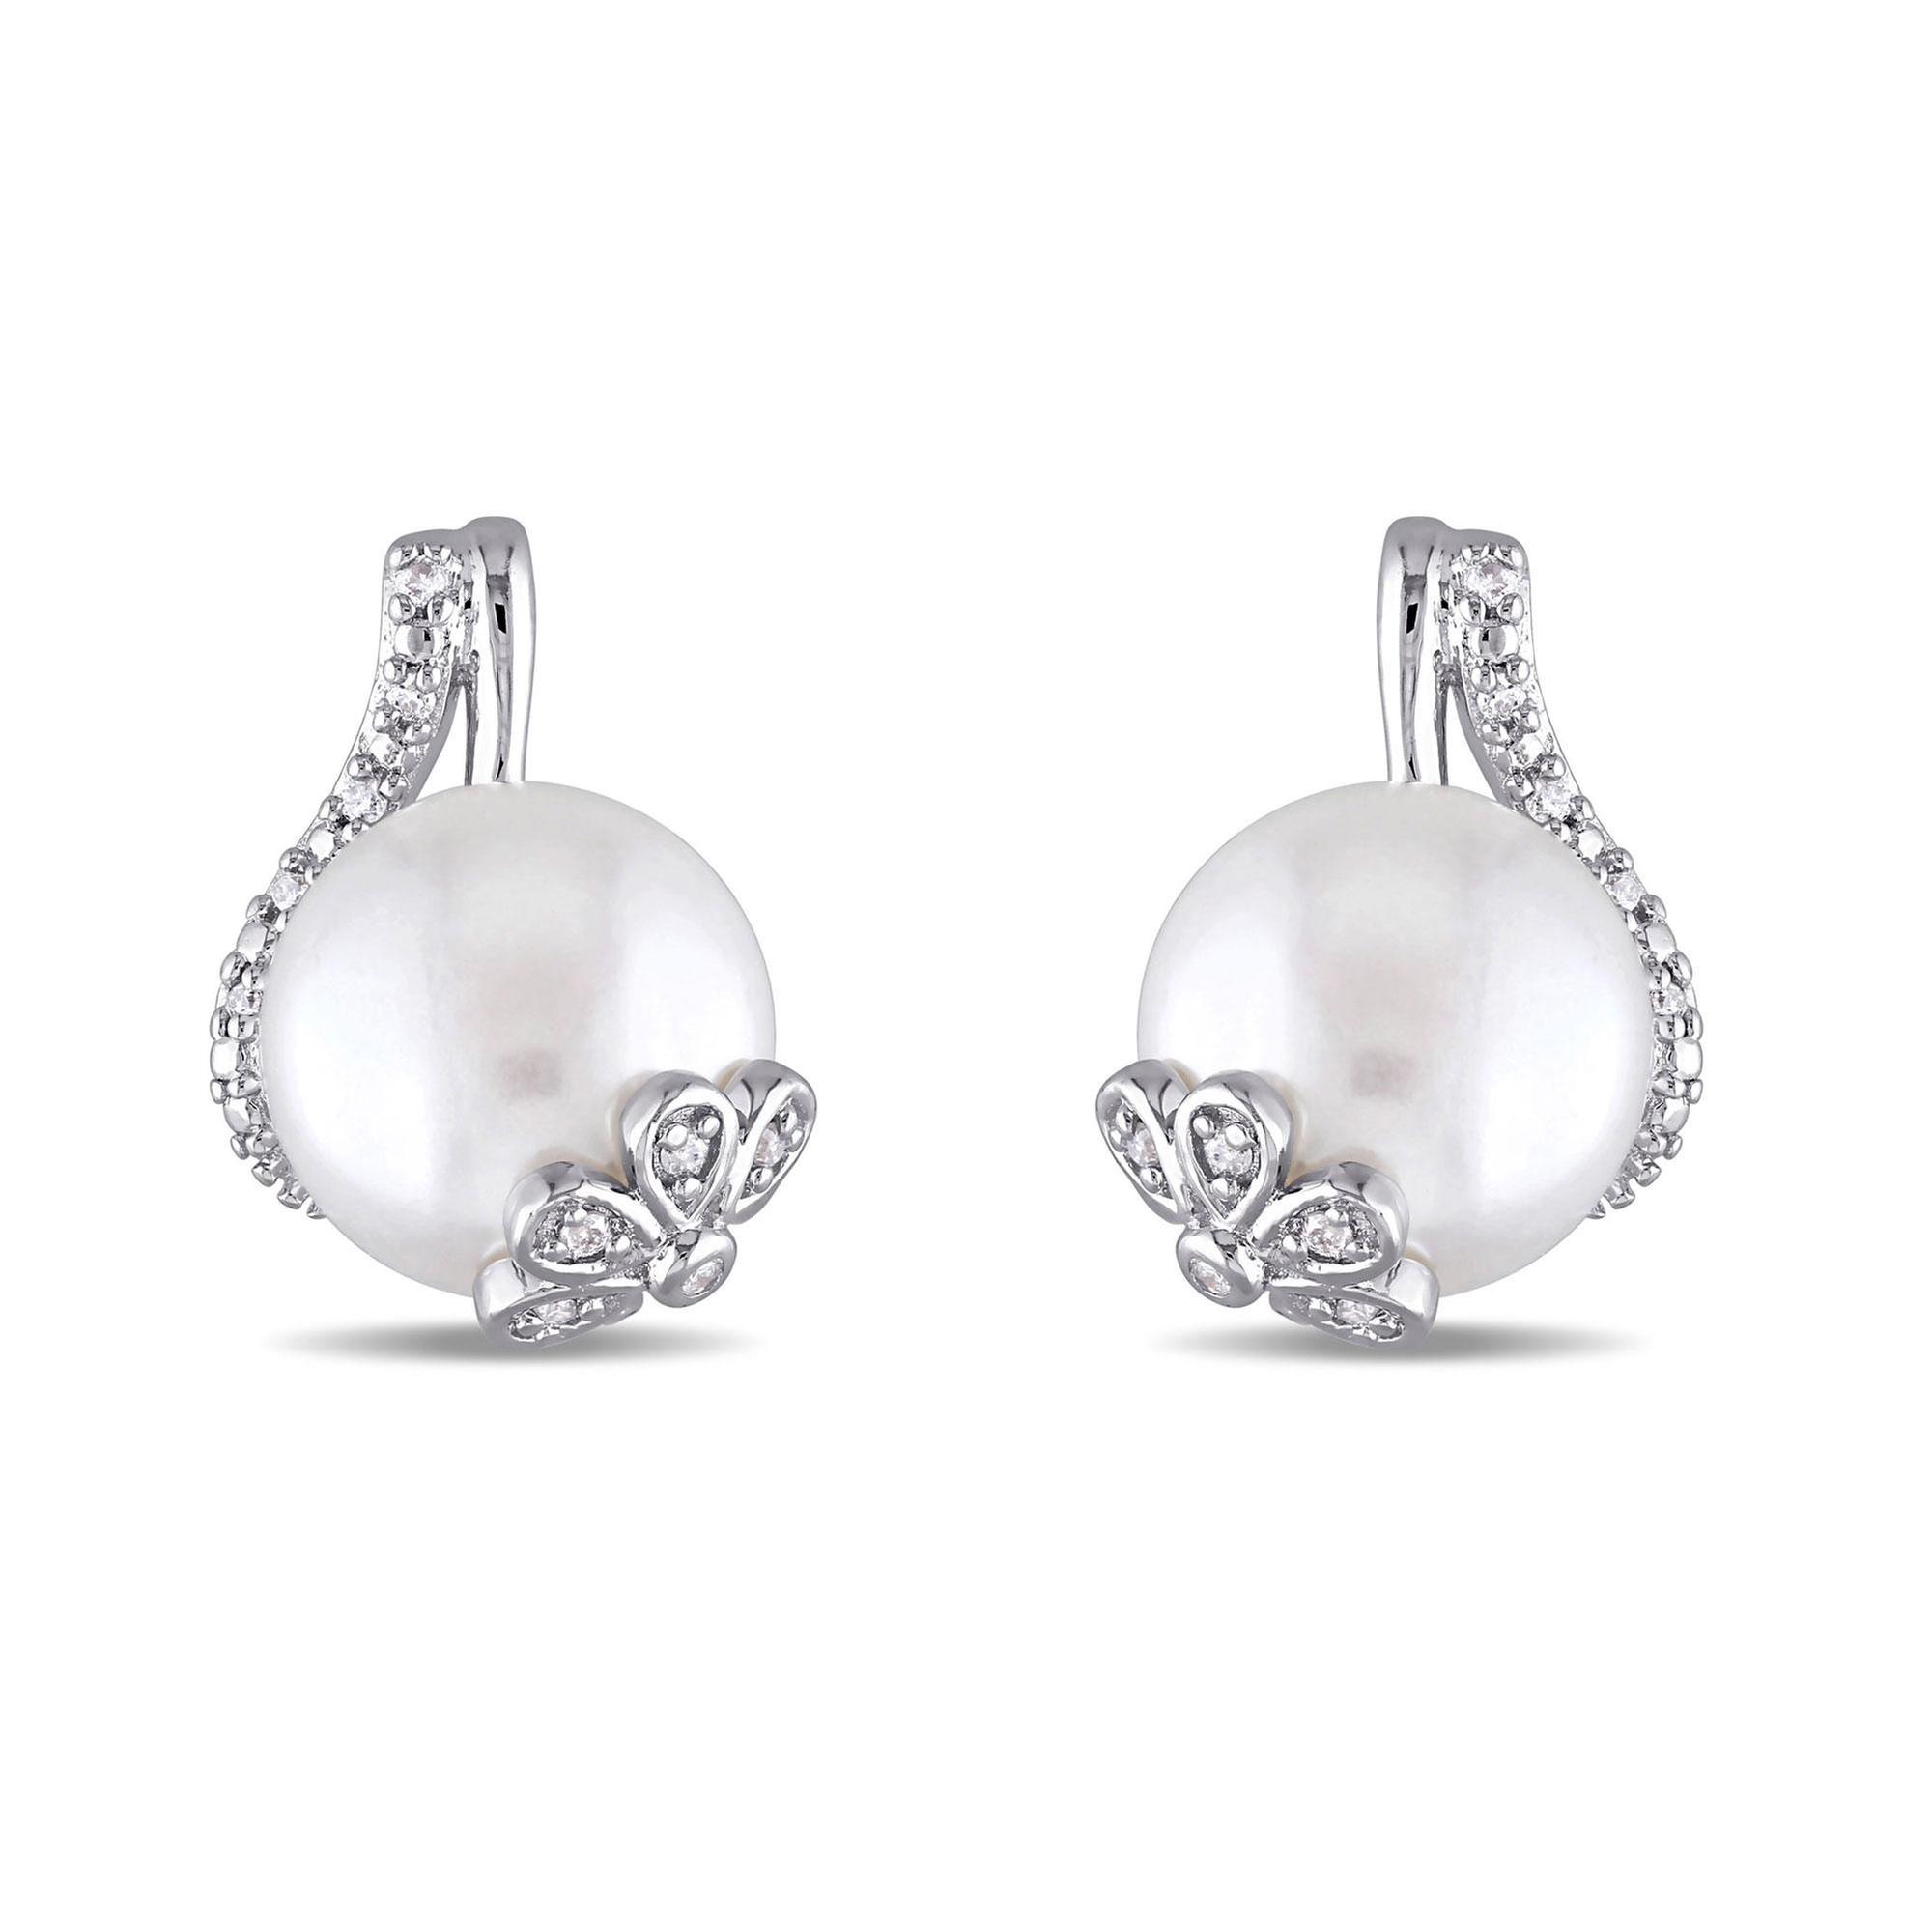 White Freshwater Cultured Pearl and Diamond Floral Earrings in Sterling Silver 1/10ctw